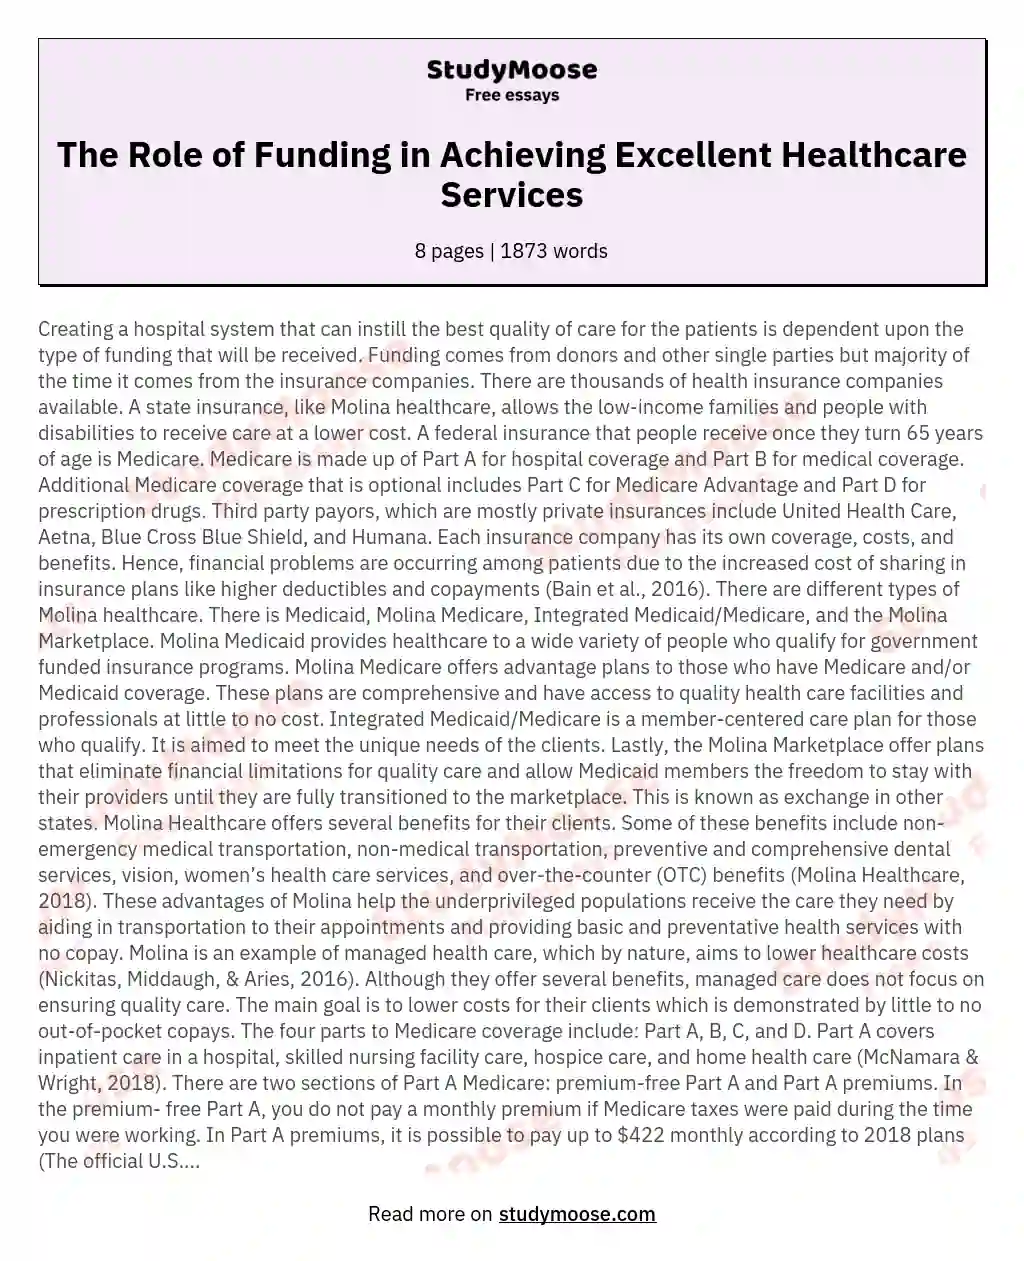 The Role of Funding in Achieving Excellent Healthcare Services essay